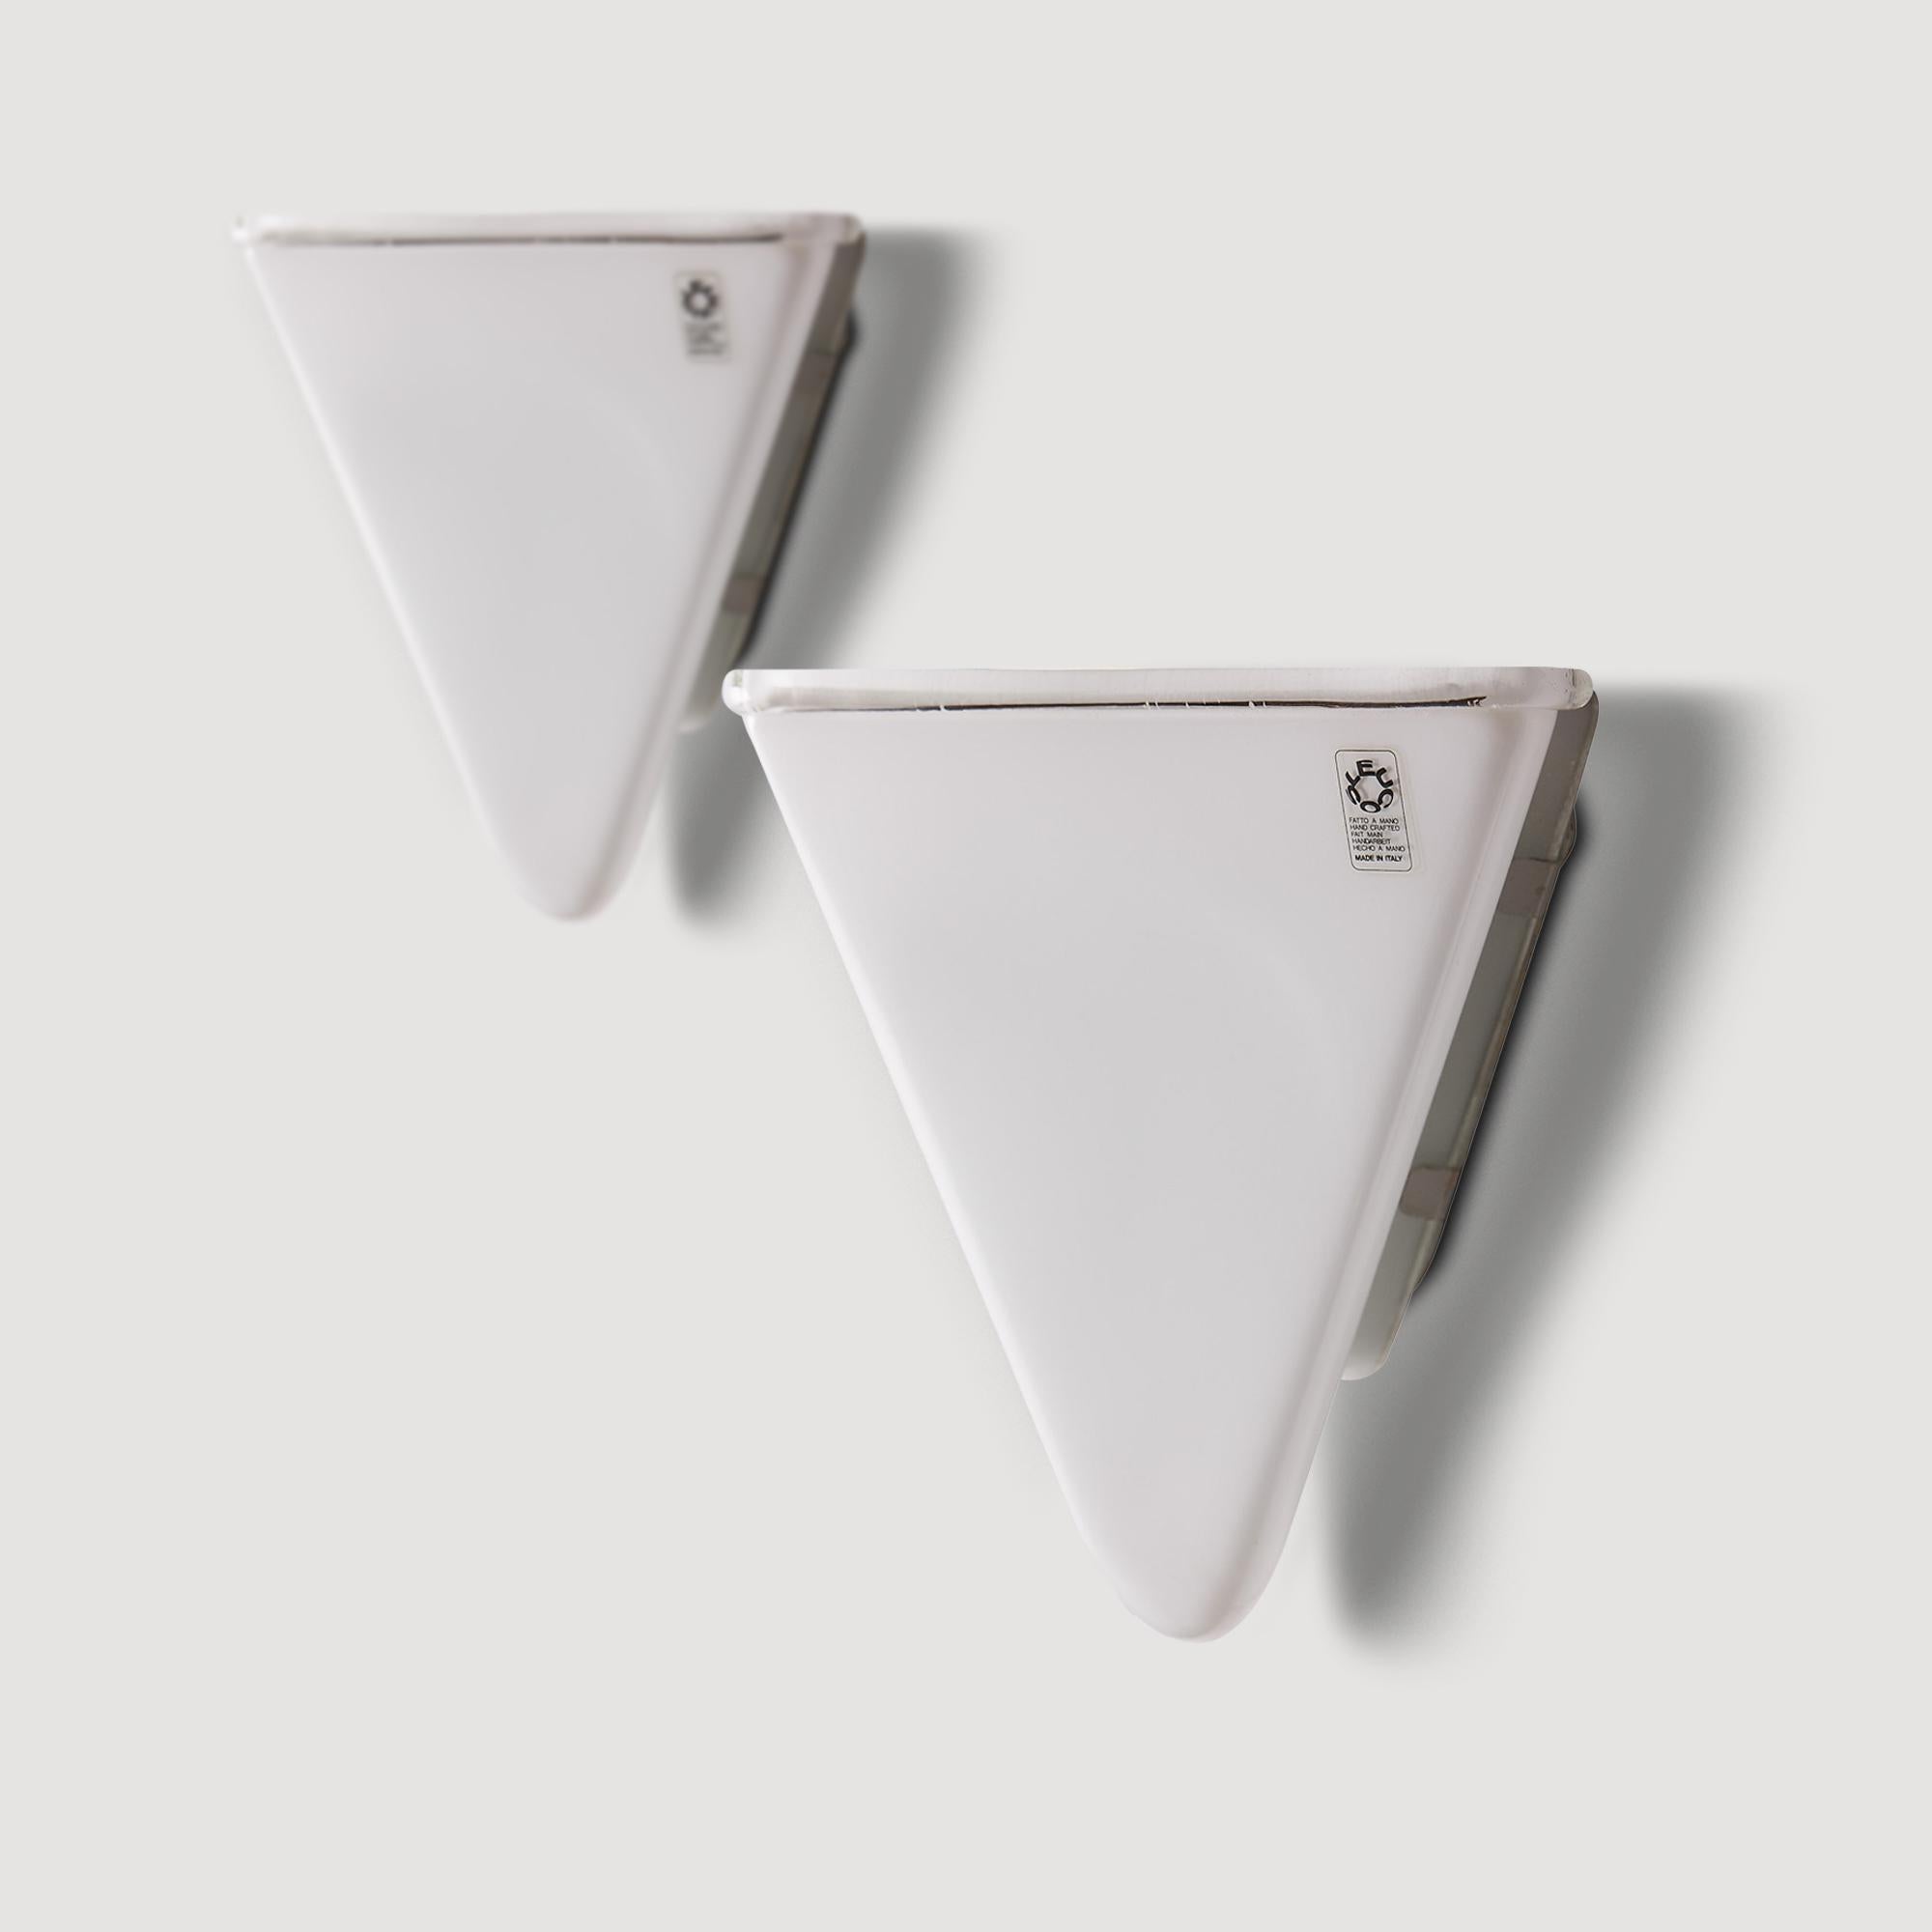 A pair of Italian glass modernist wall lights by Leucos, in opaline glass, 1980s.